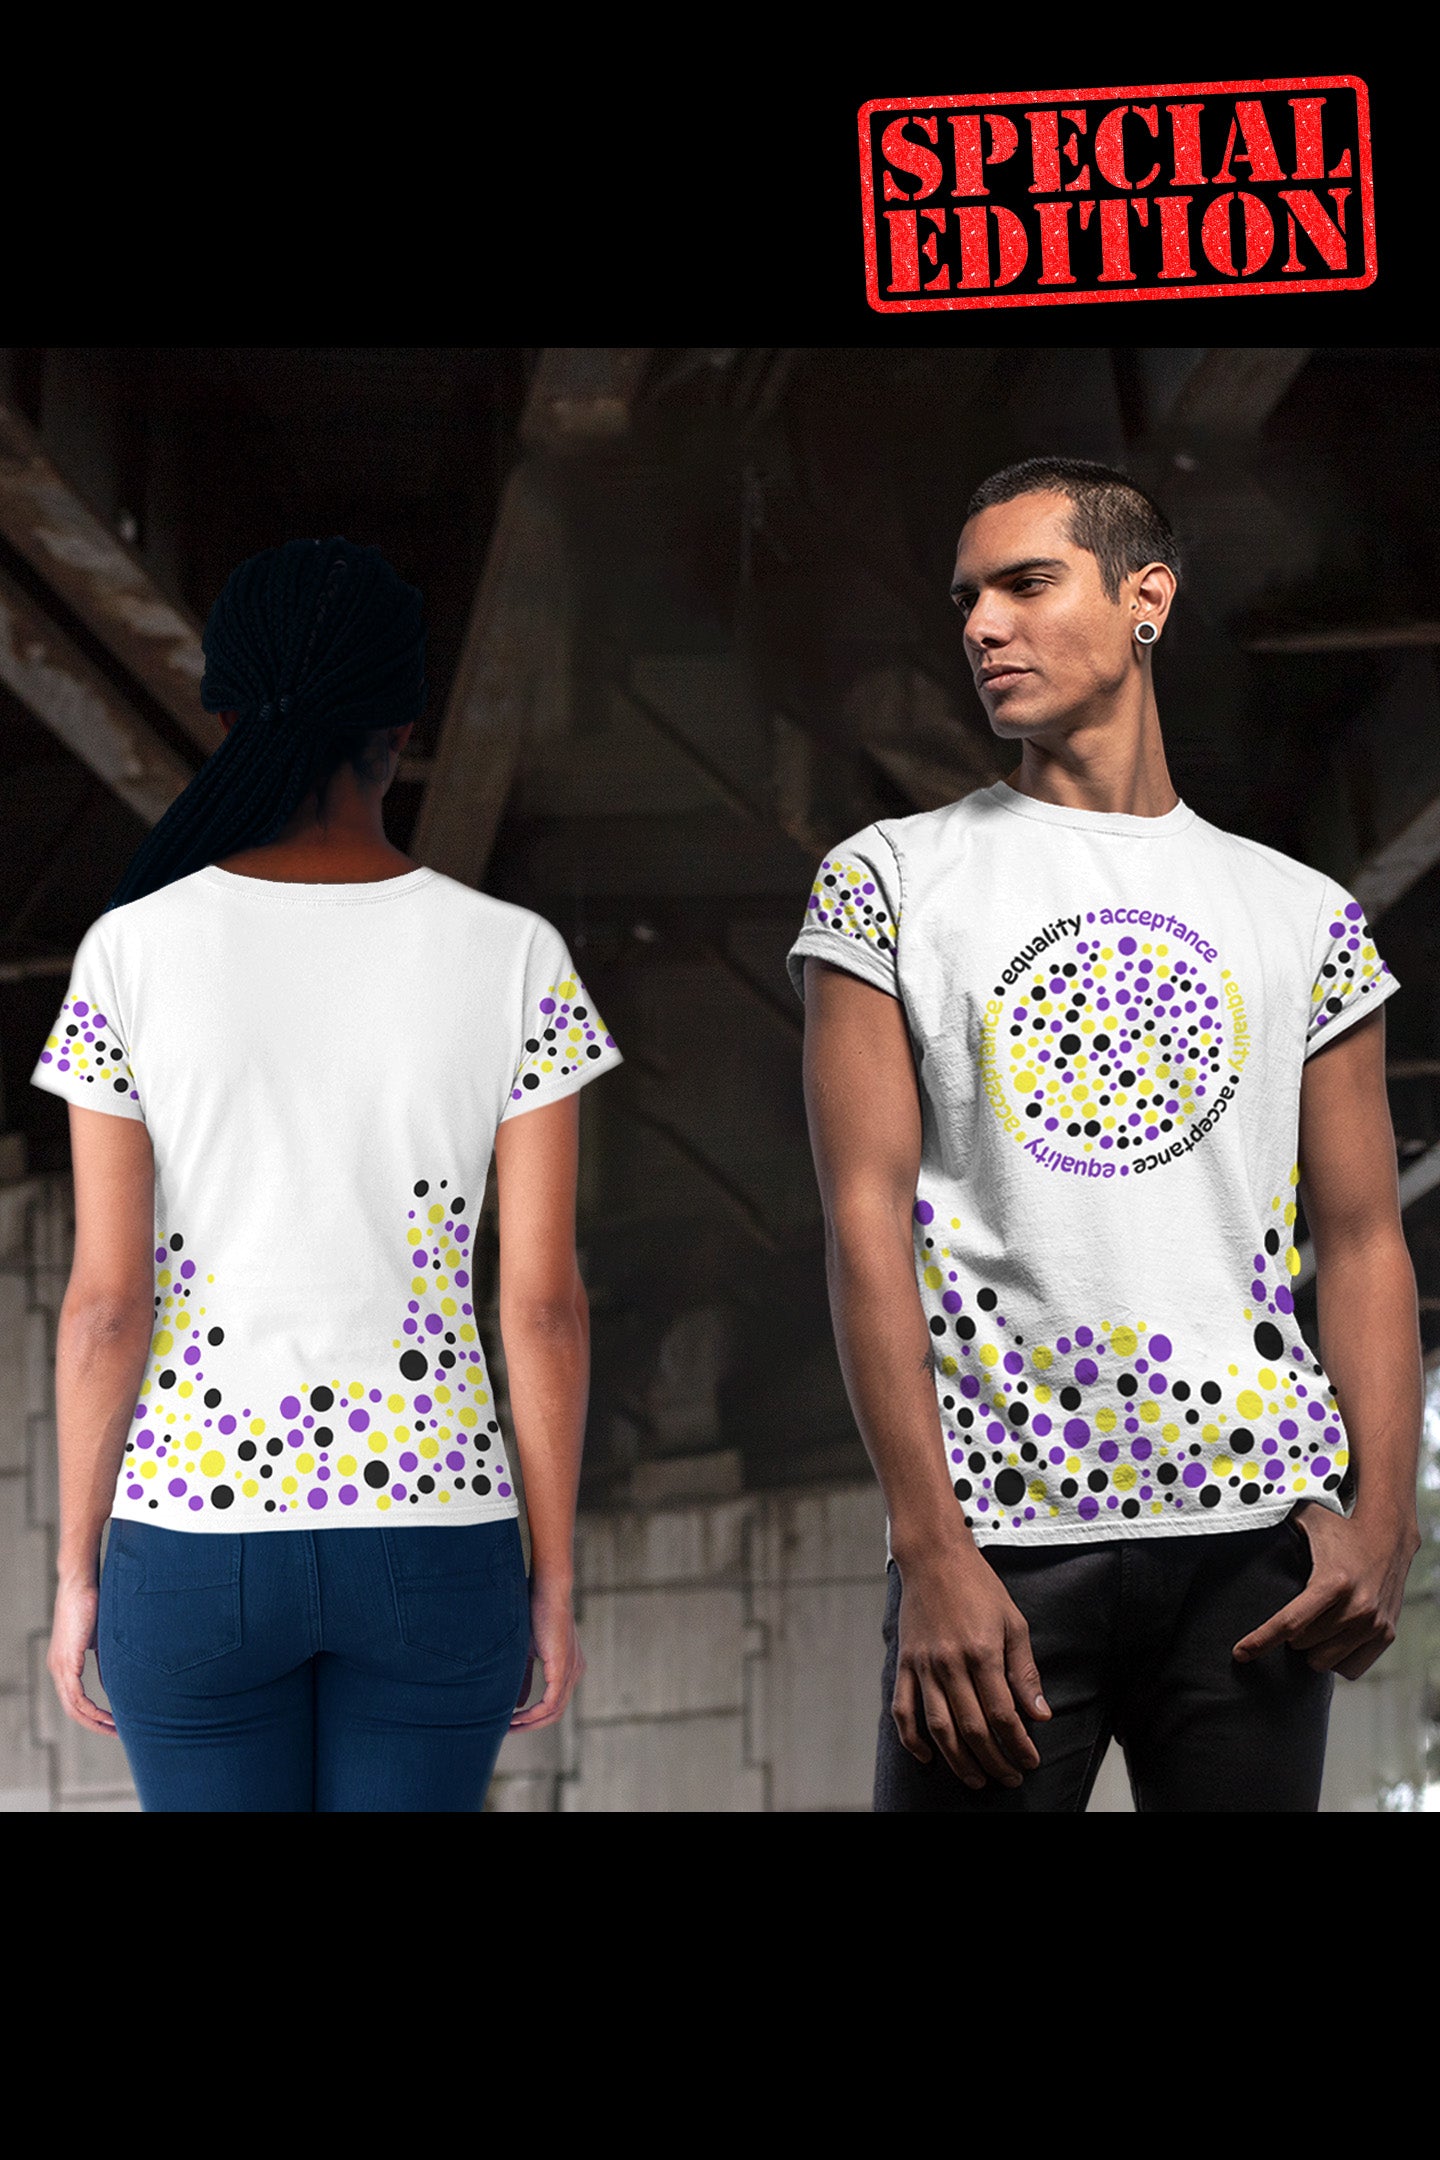 Designer Non-Binary pride shirt, Special Edition - This gorgeous Unisex high quality allover print is our favourite design!